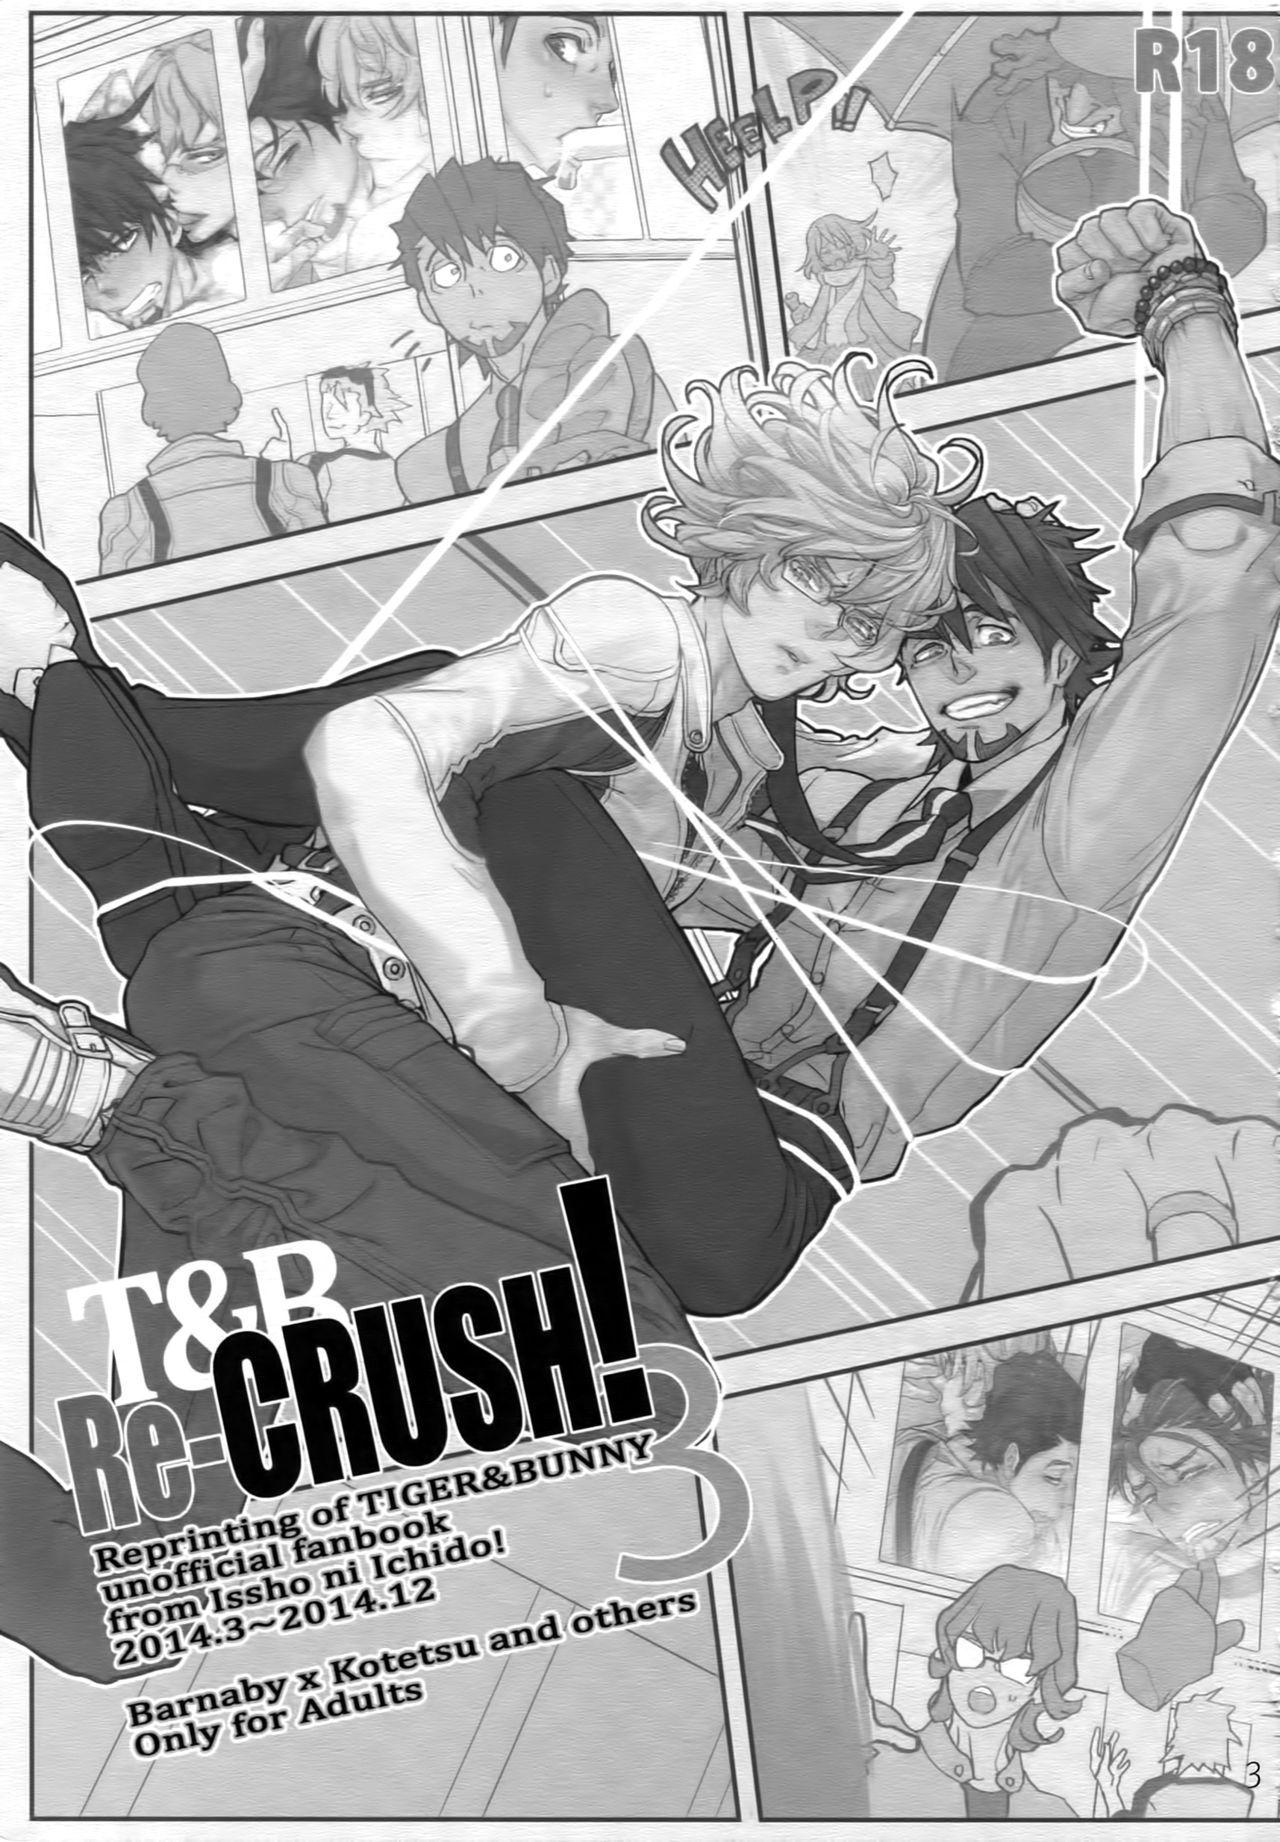 Whore T&B Re-CRUSH!3 - Tiger and bunny Amateur Xxx - Page 2